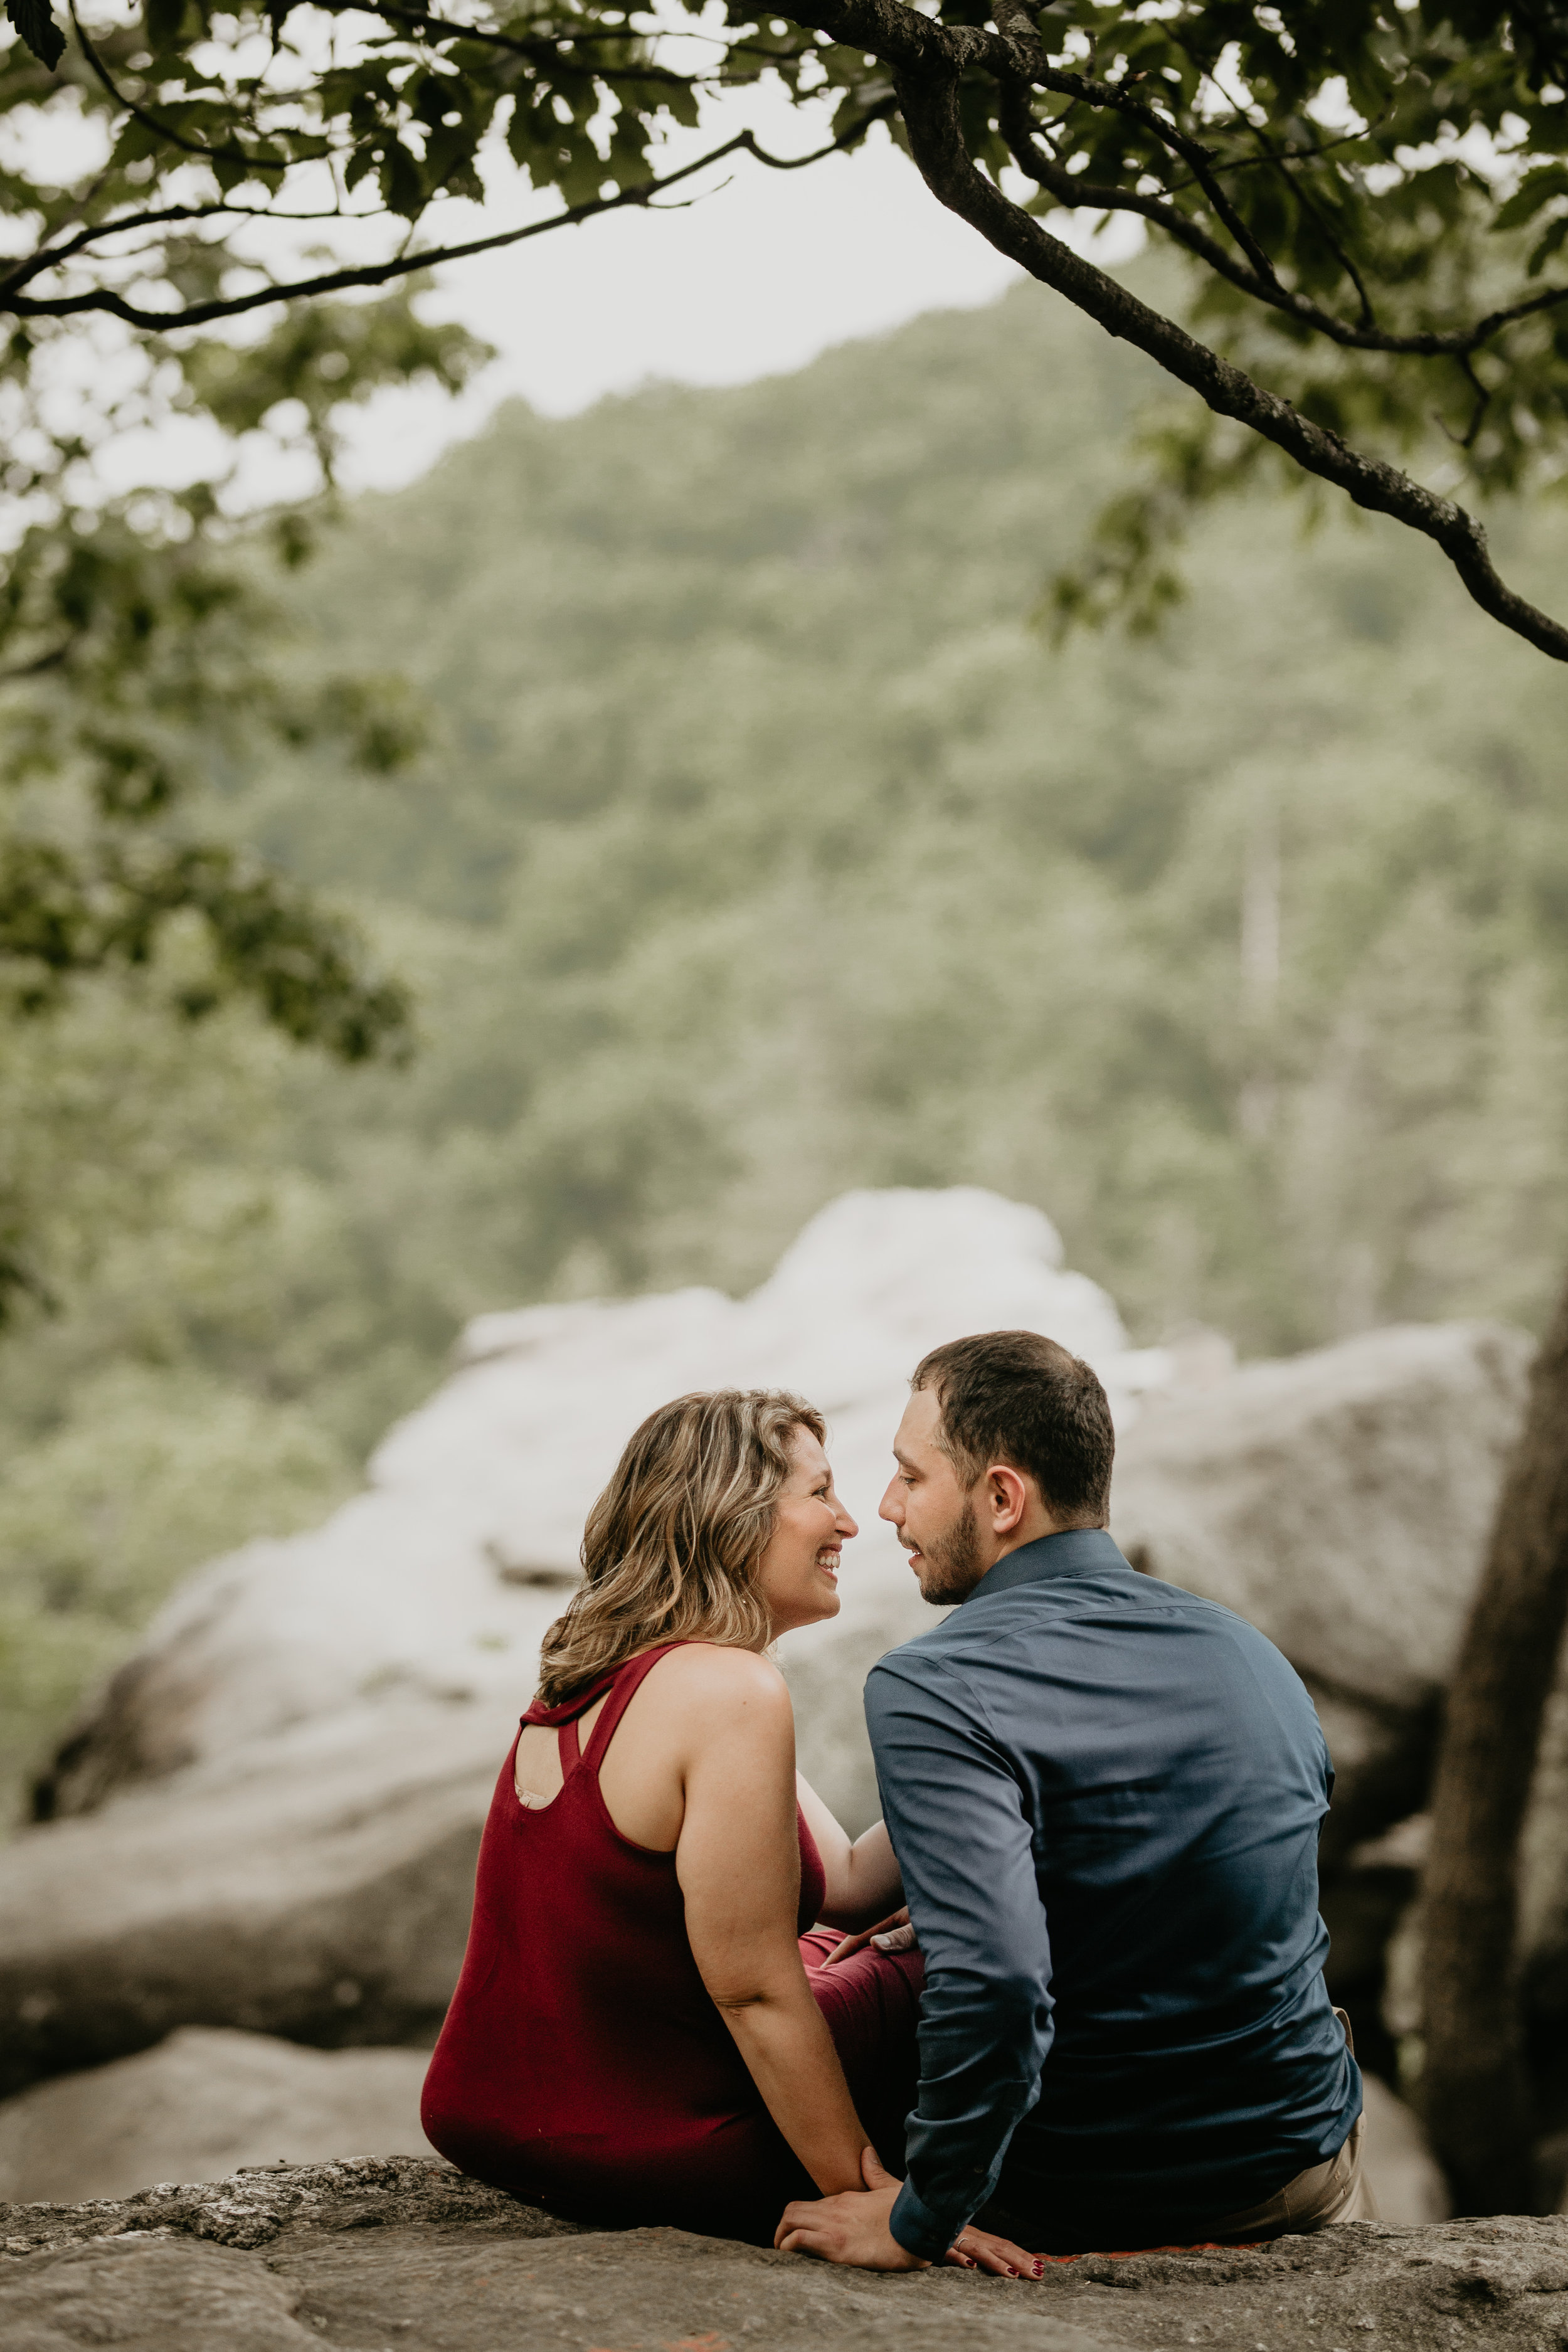 Nicole-Daacke-Photography-rock-state-park-overlook-king-queen-seat-maryland-hiking-adventure-engagement-session-photos-portraits-summer-bel-air-dog-engagement-session-20.jpg